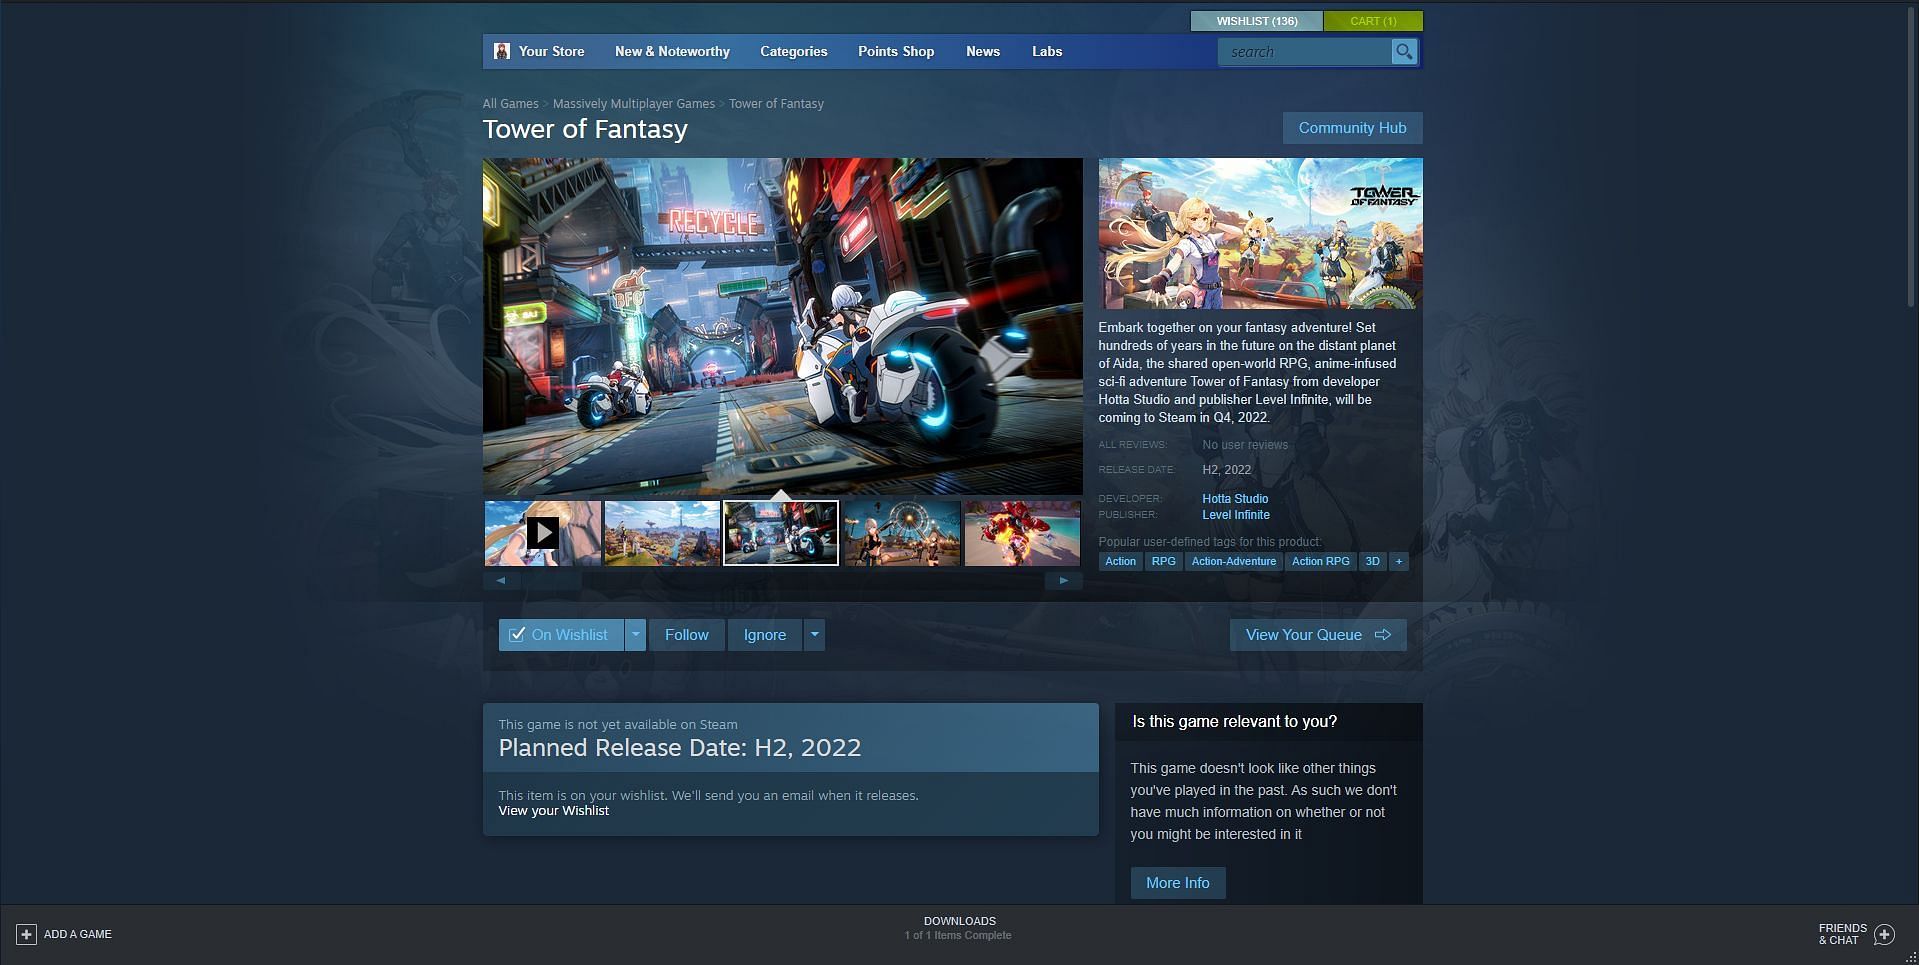 The global version is available on PC for wishlist (Image via Steam)